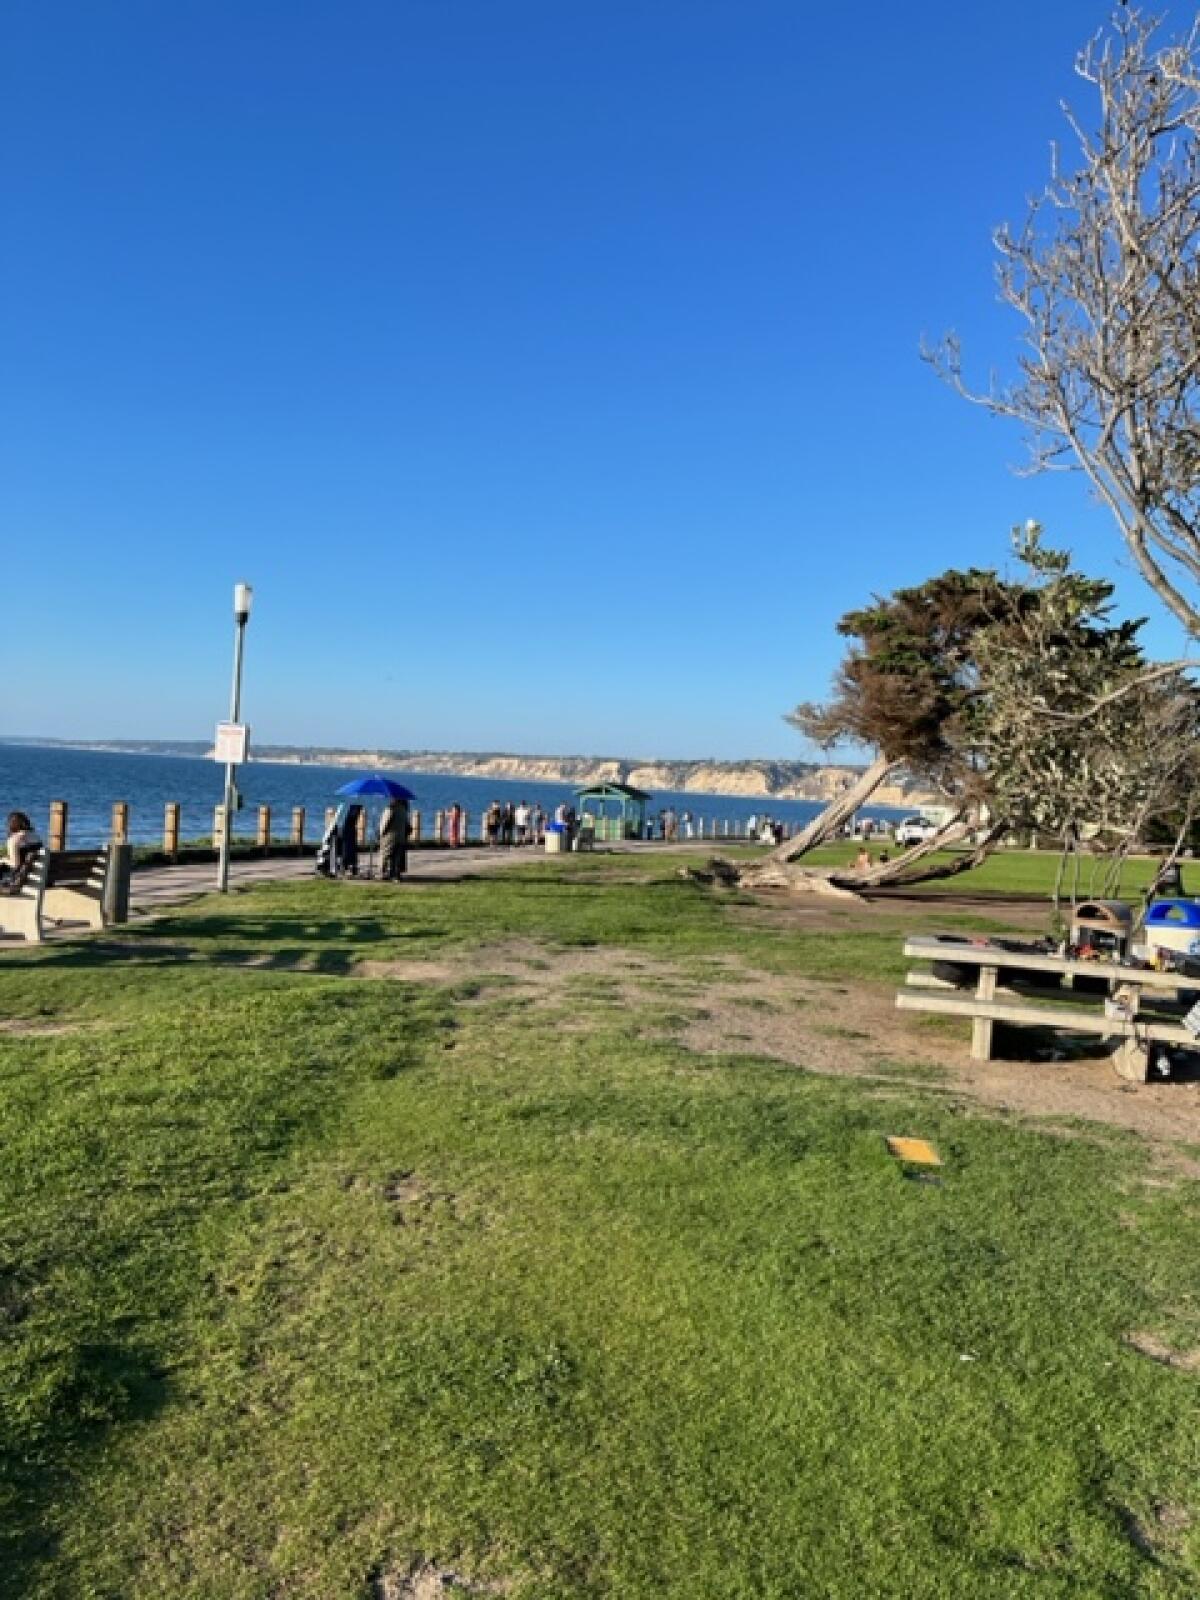 Scripps Park in La Jolla was nearly vacant of vendors in this photo taken Sept. 6.